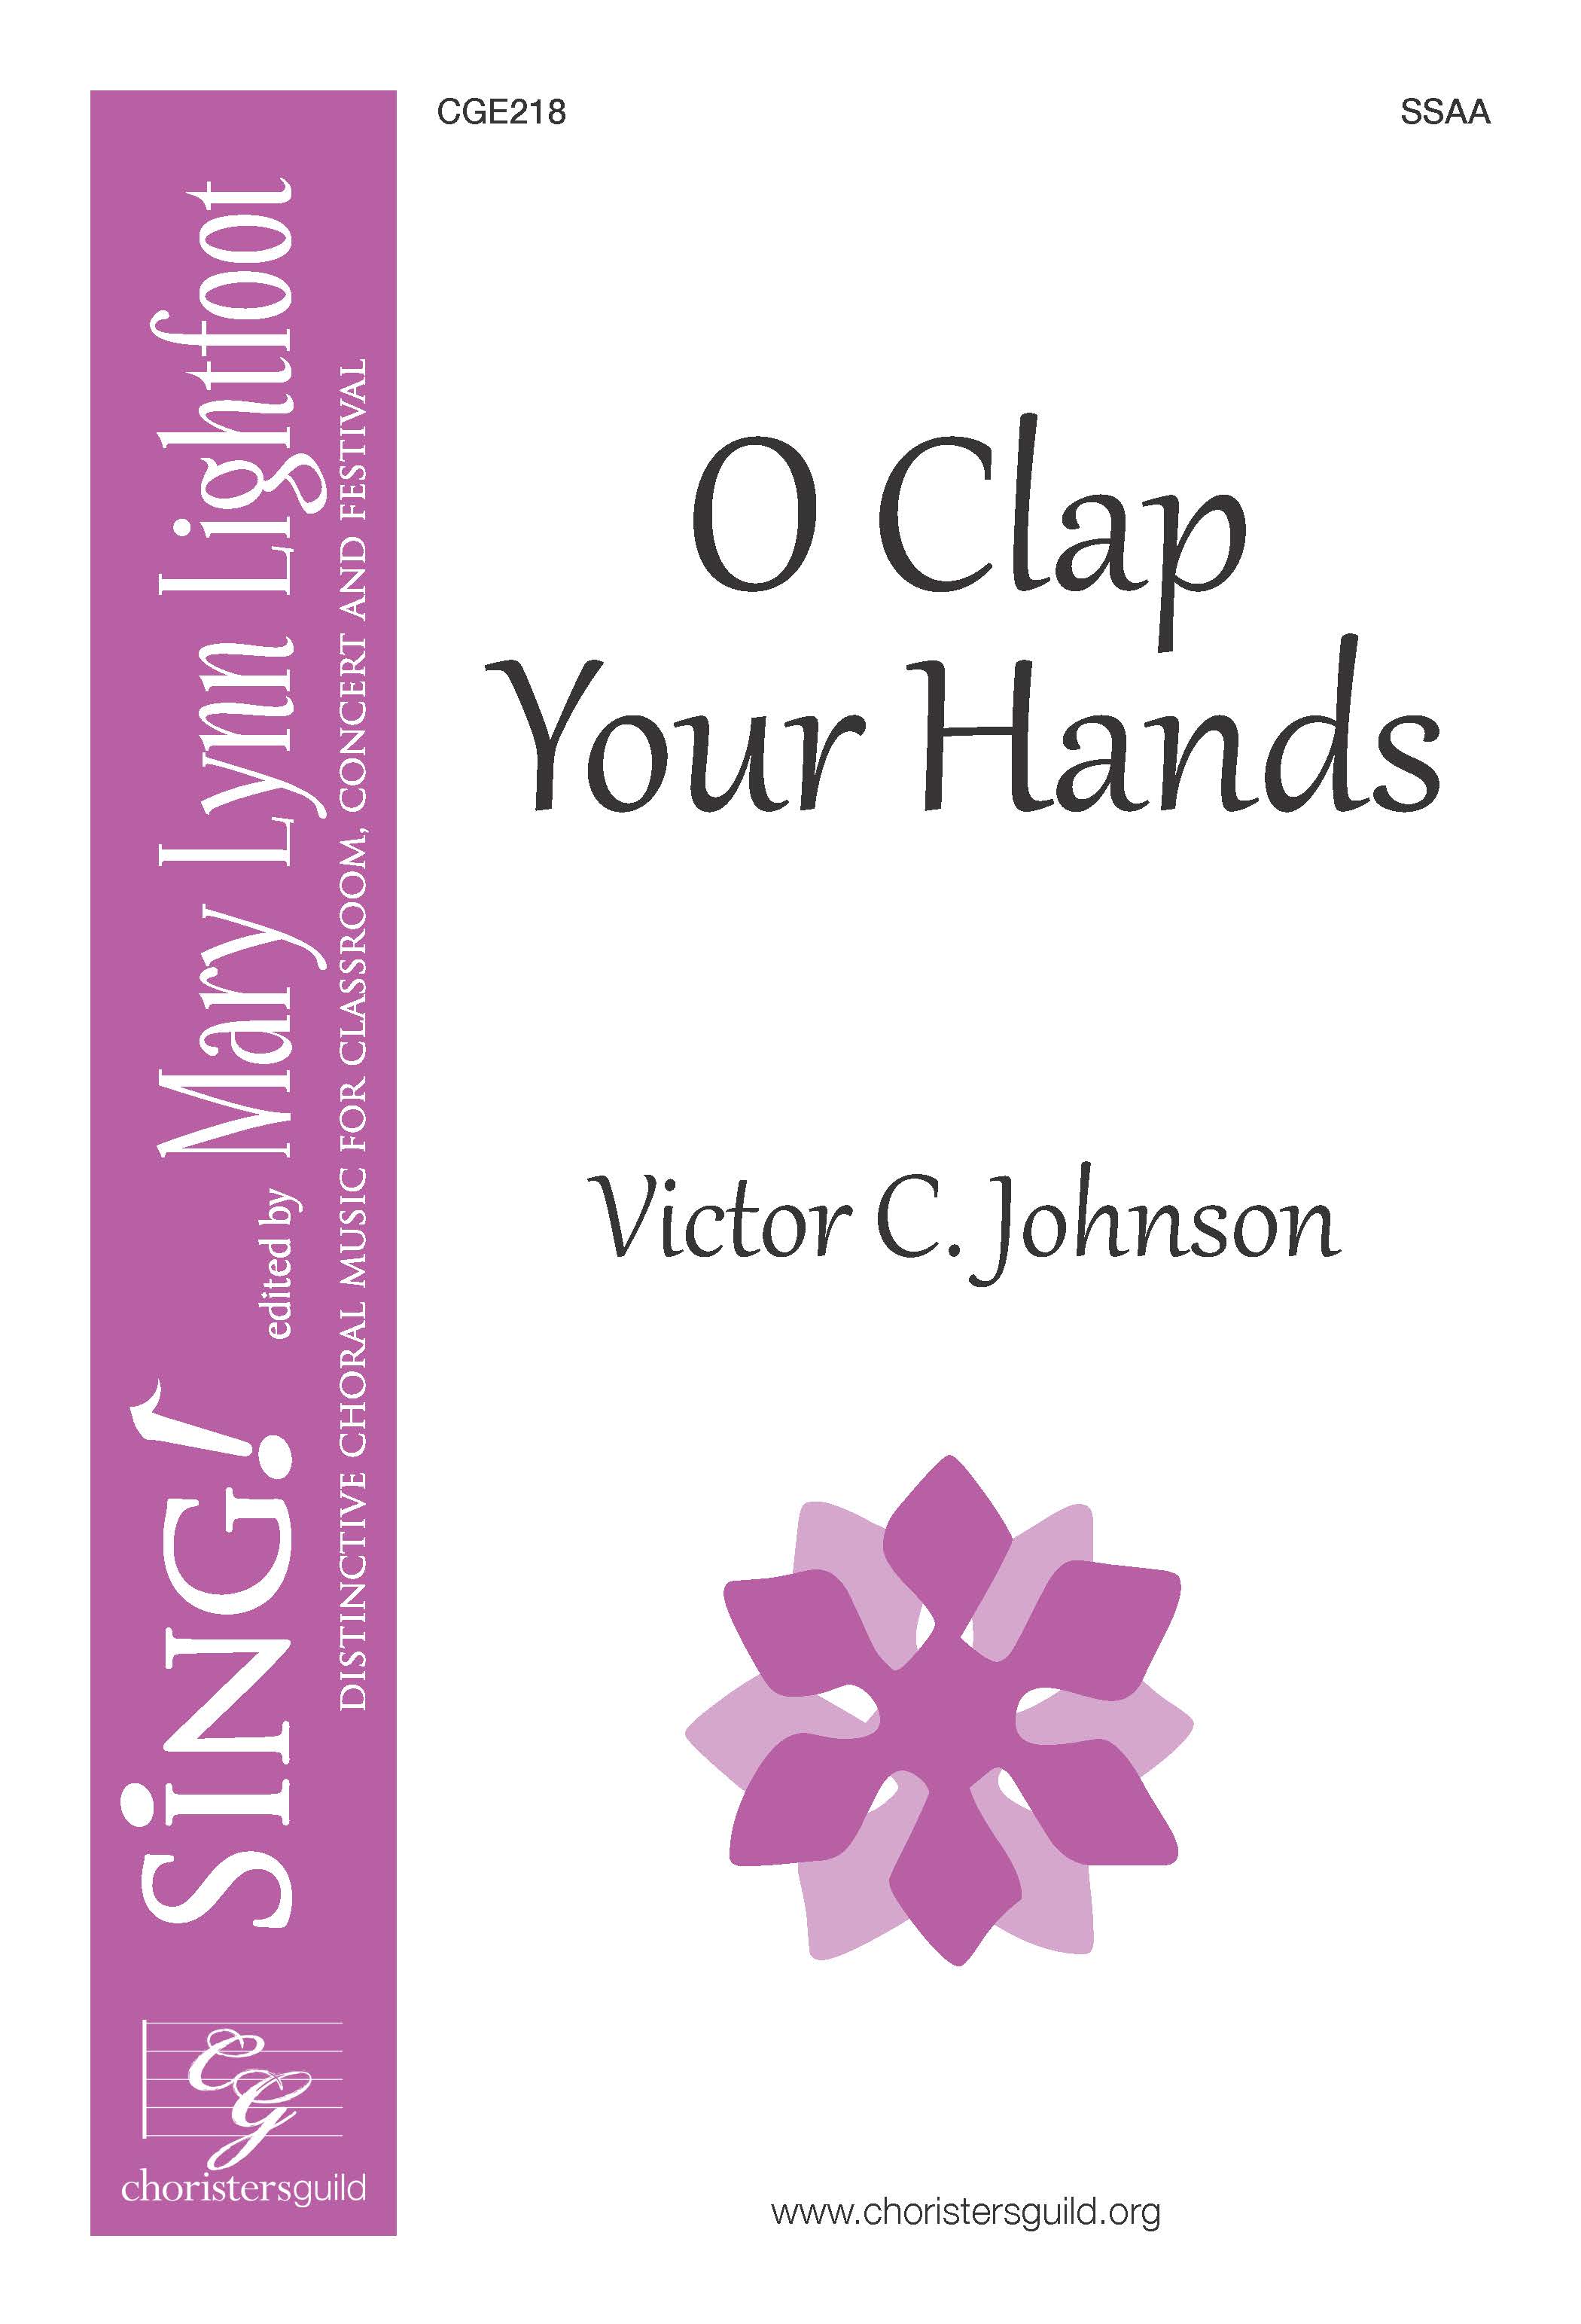 O Clap Your Hands - SSAA